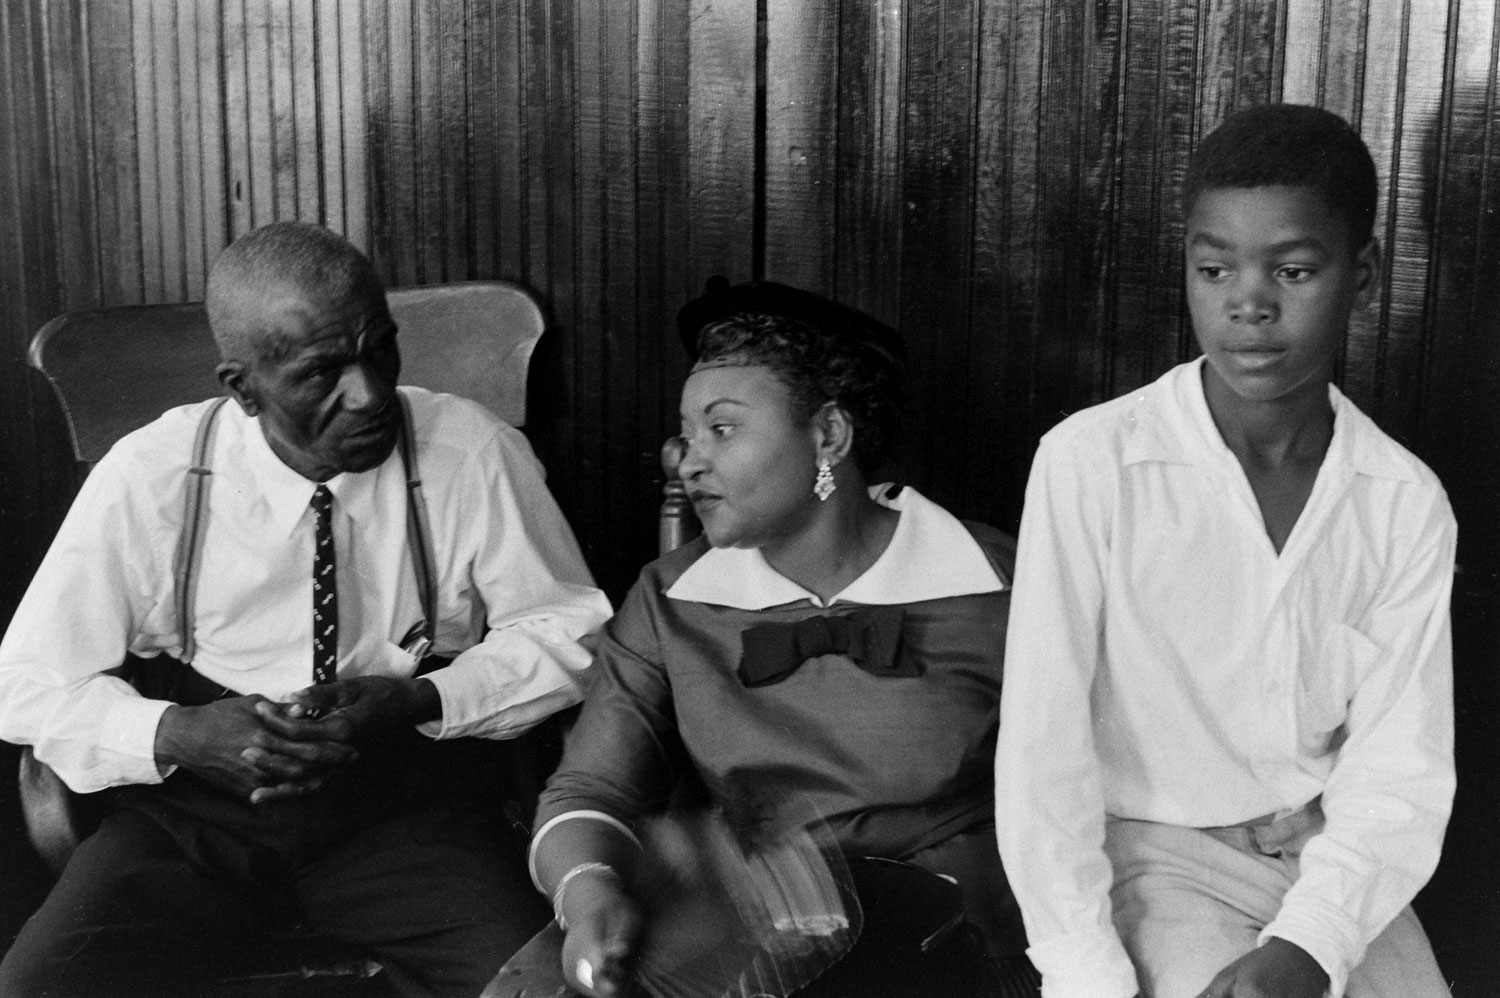 From left: Emmett Till's great-uncle, the Rev. Mose Wright; his mother Mamie Bradley; and his cousin Simeon Wright.